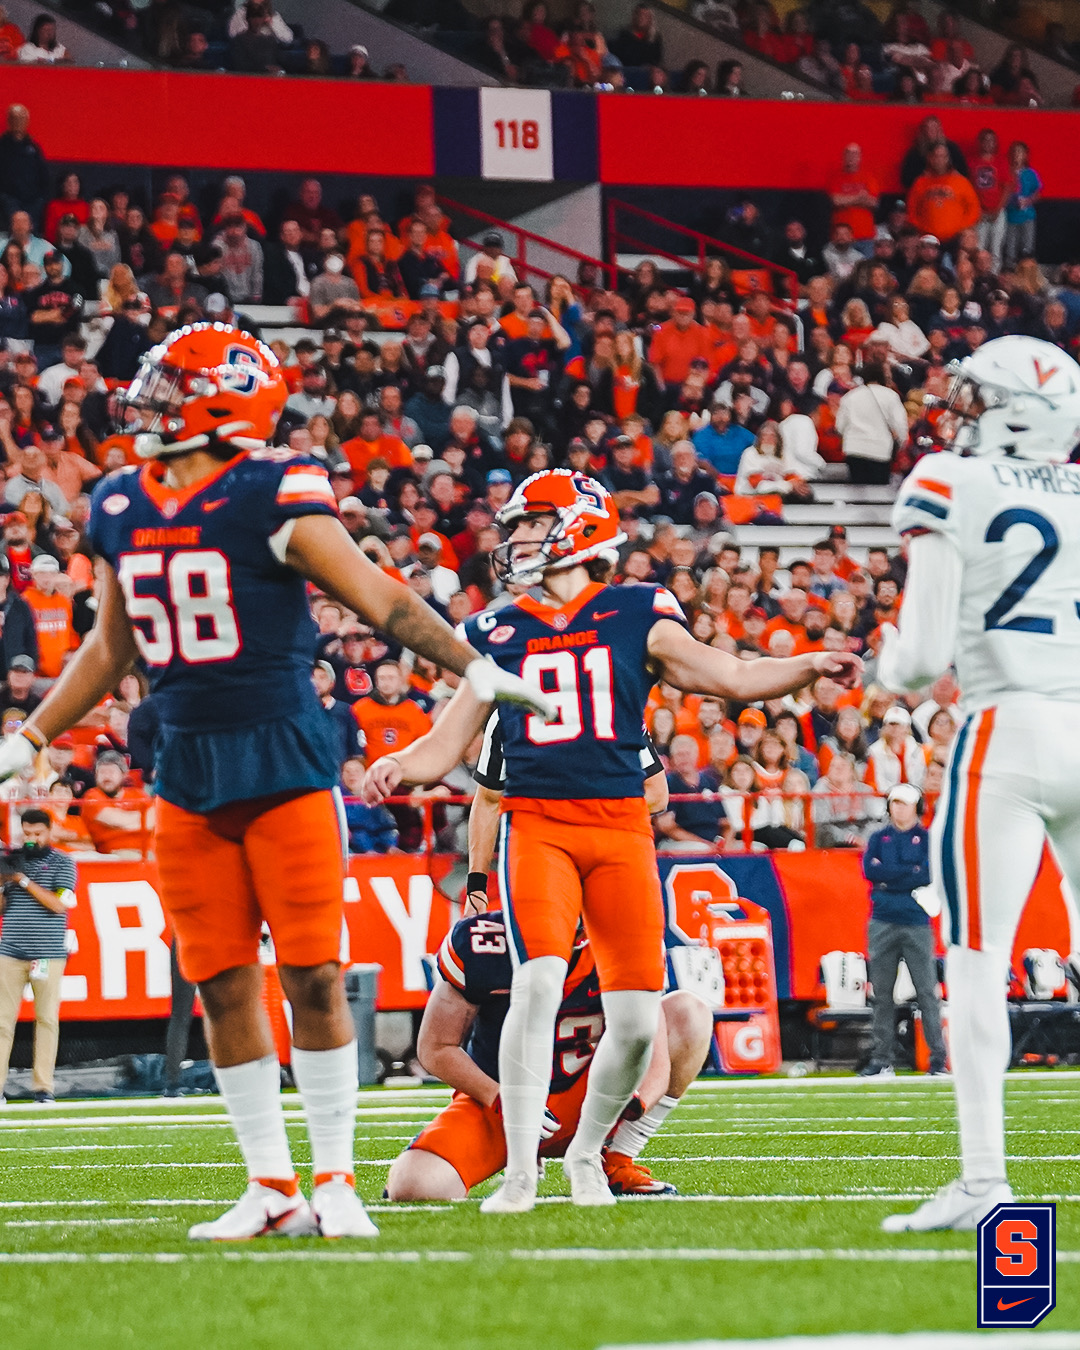 Syracuse holds off Virginia to improve to 4-0 (full coverage)